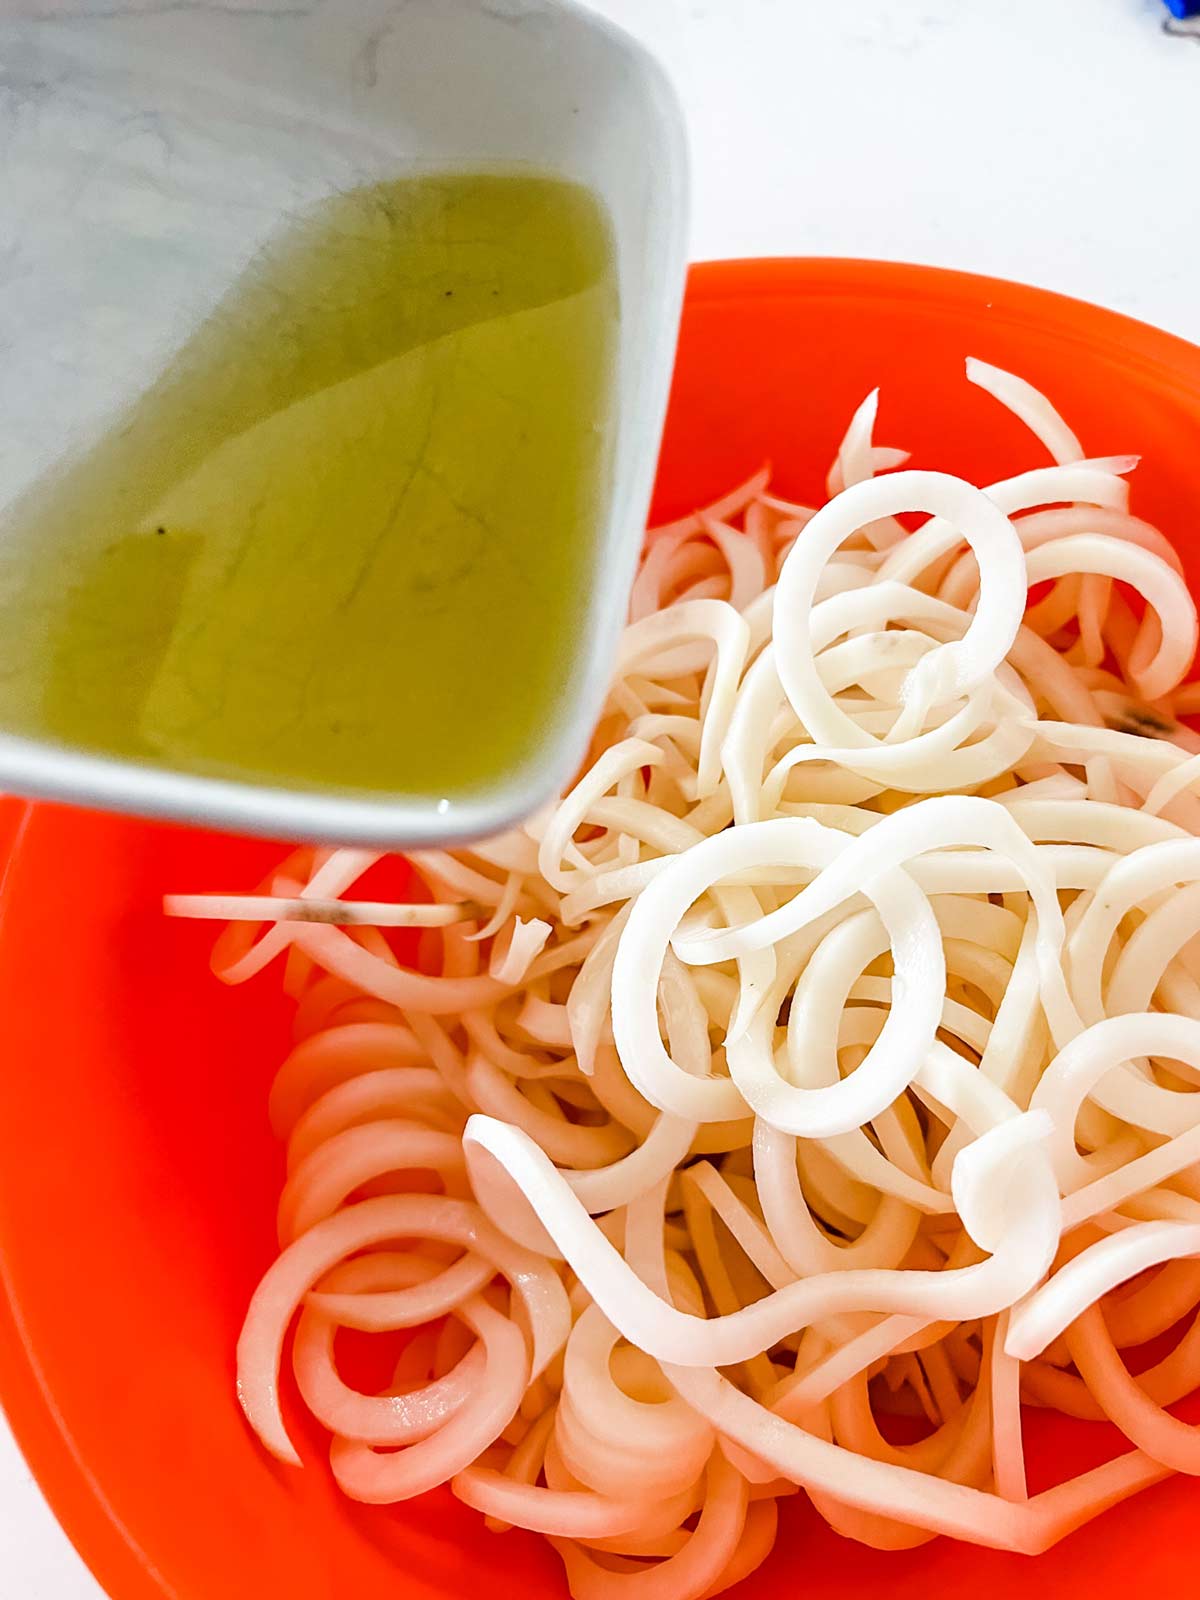 Spiralized potatoes in an orange bowl being tossed with oil.